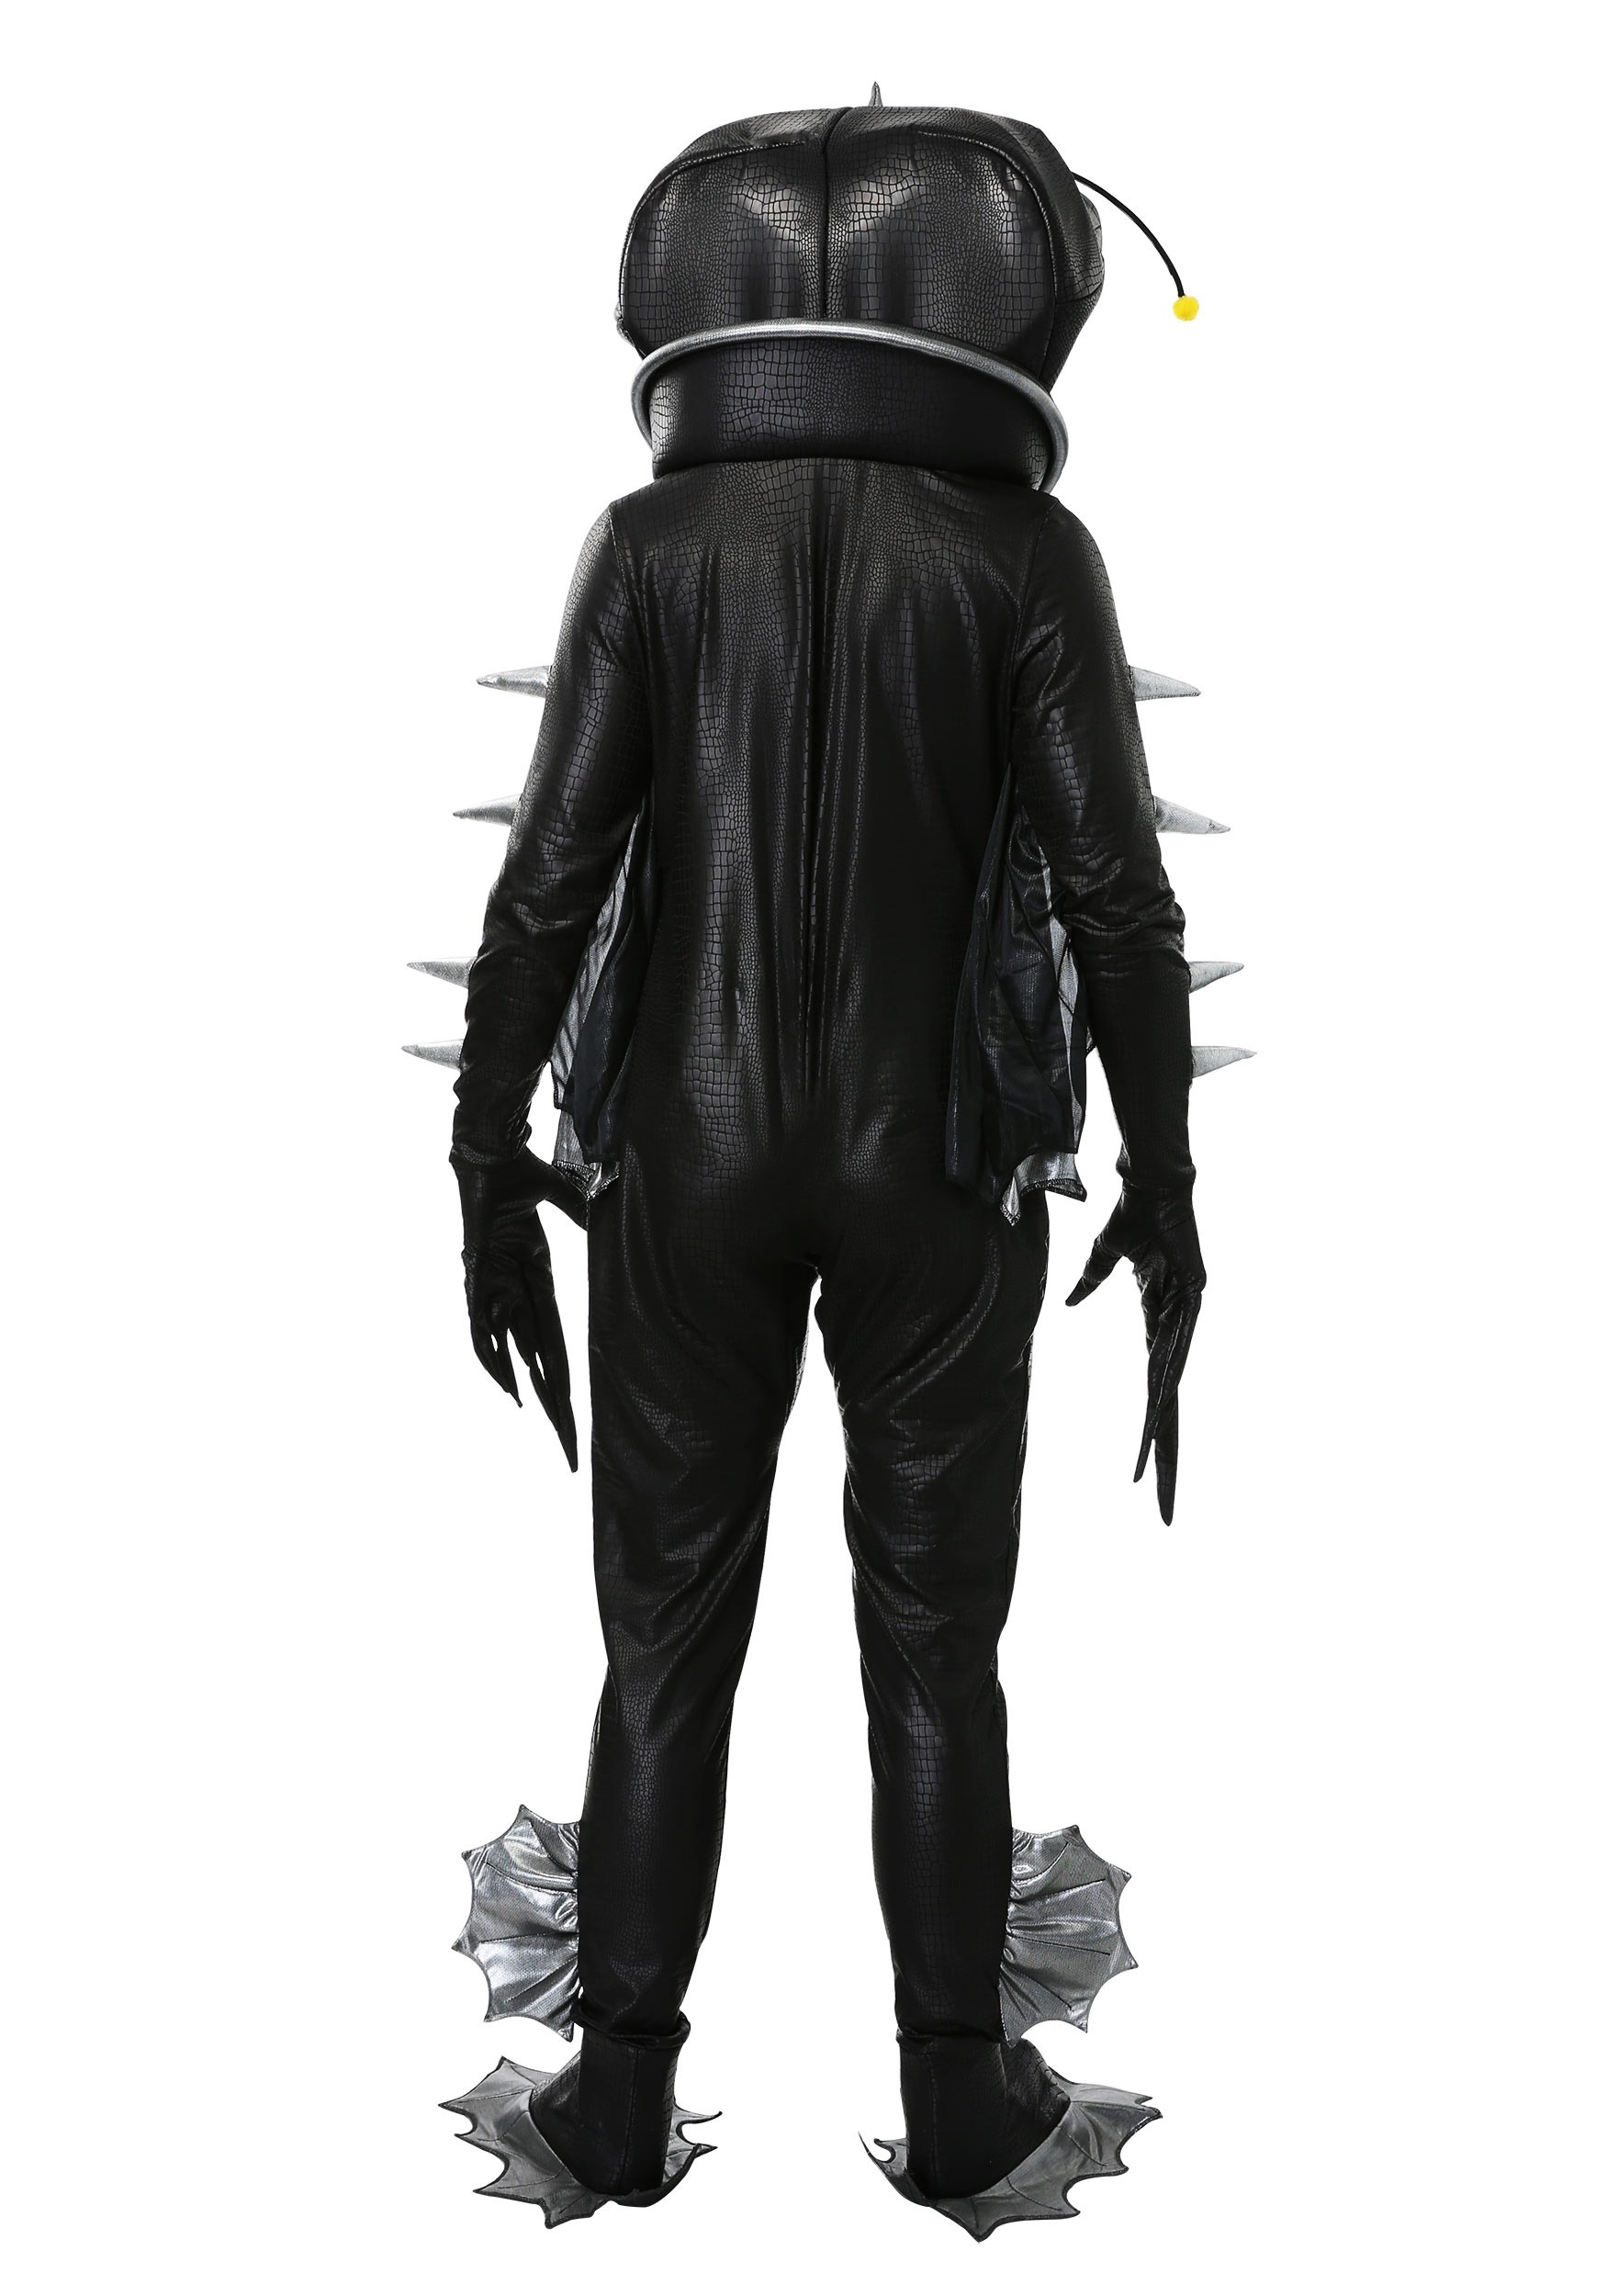 Angler Fish Costume for Adults